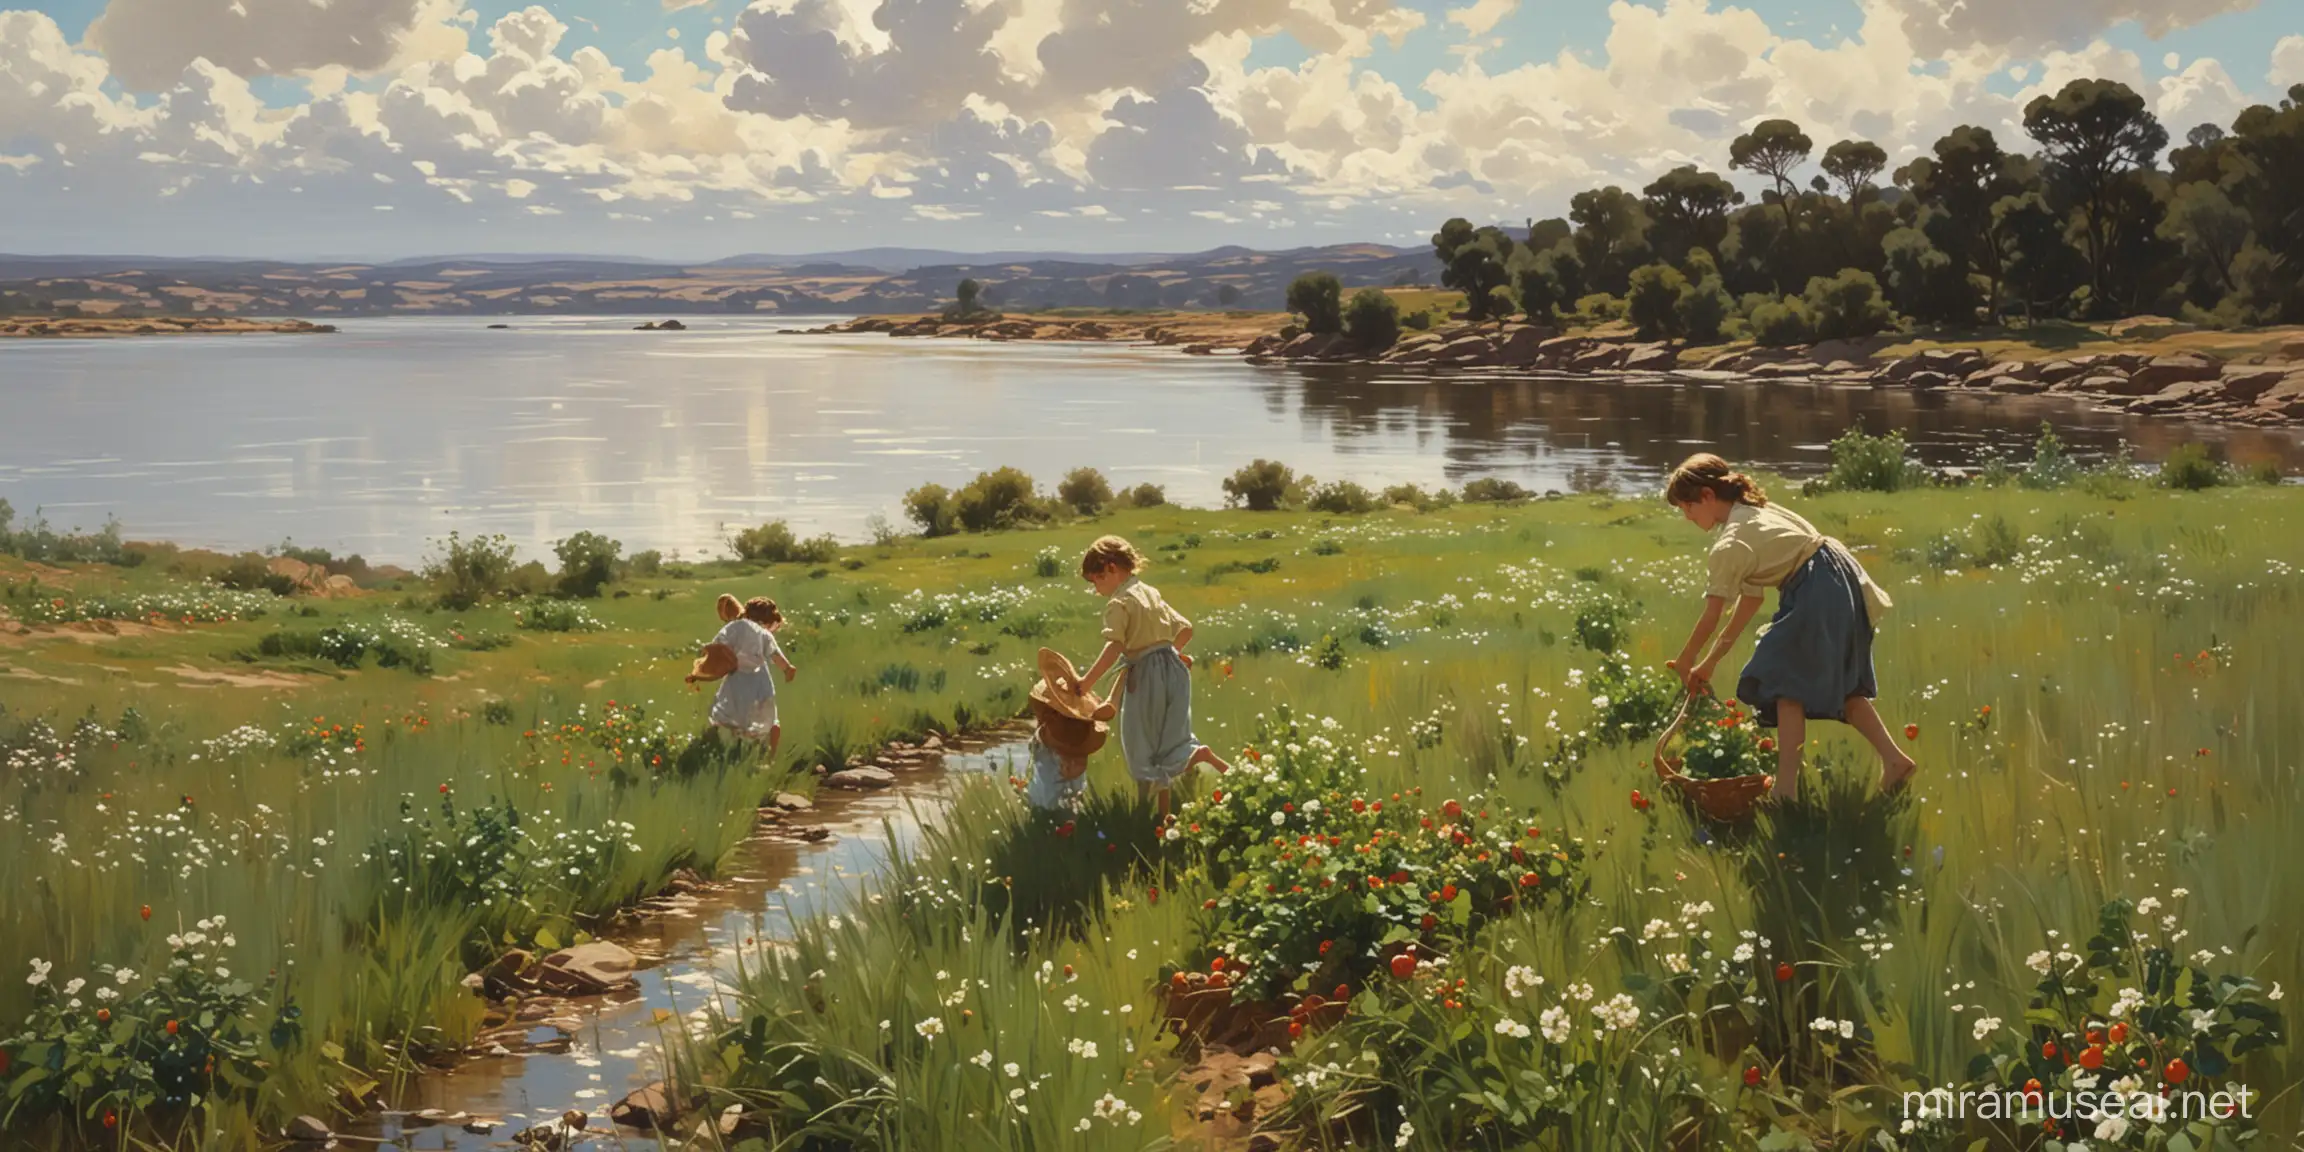 Children Searching for Strawberries in Sunlit Field by the River